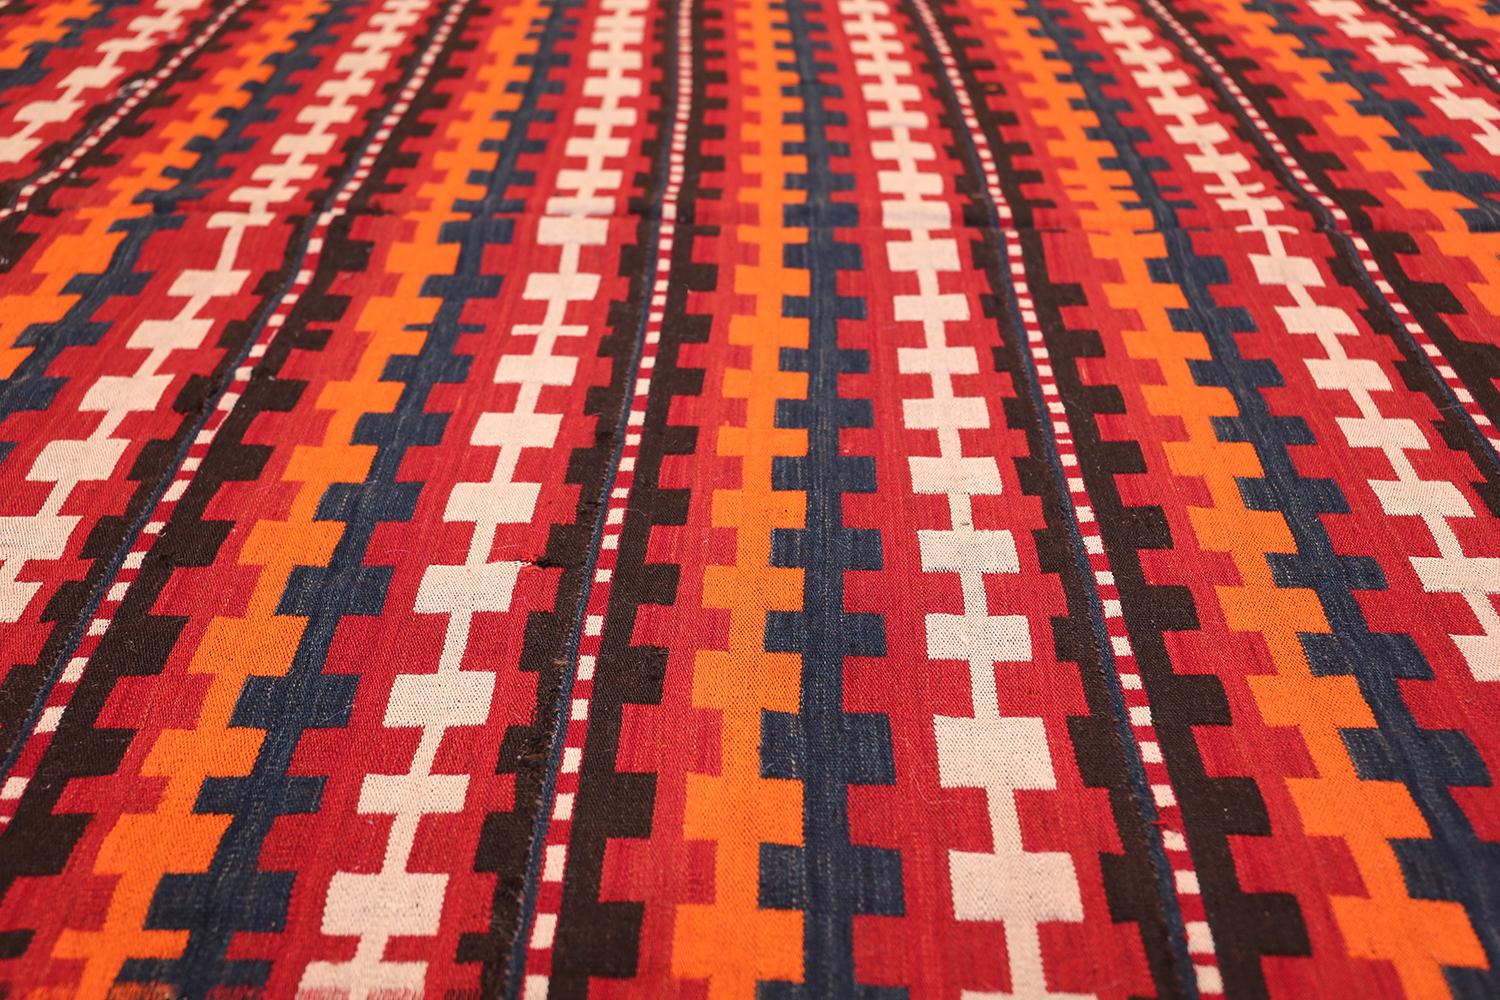 Wool Vintage Tribal Caucasian Kilim Rug. Size: 5 ft 6 in x 9 ft (1.68 m x 2.74 m)